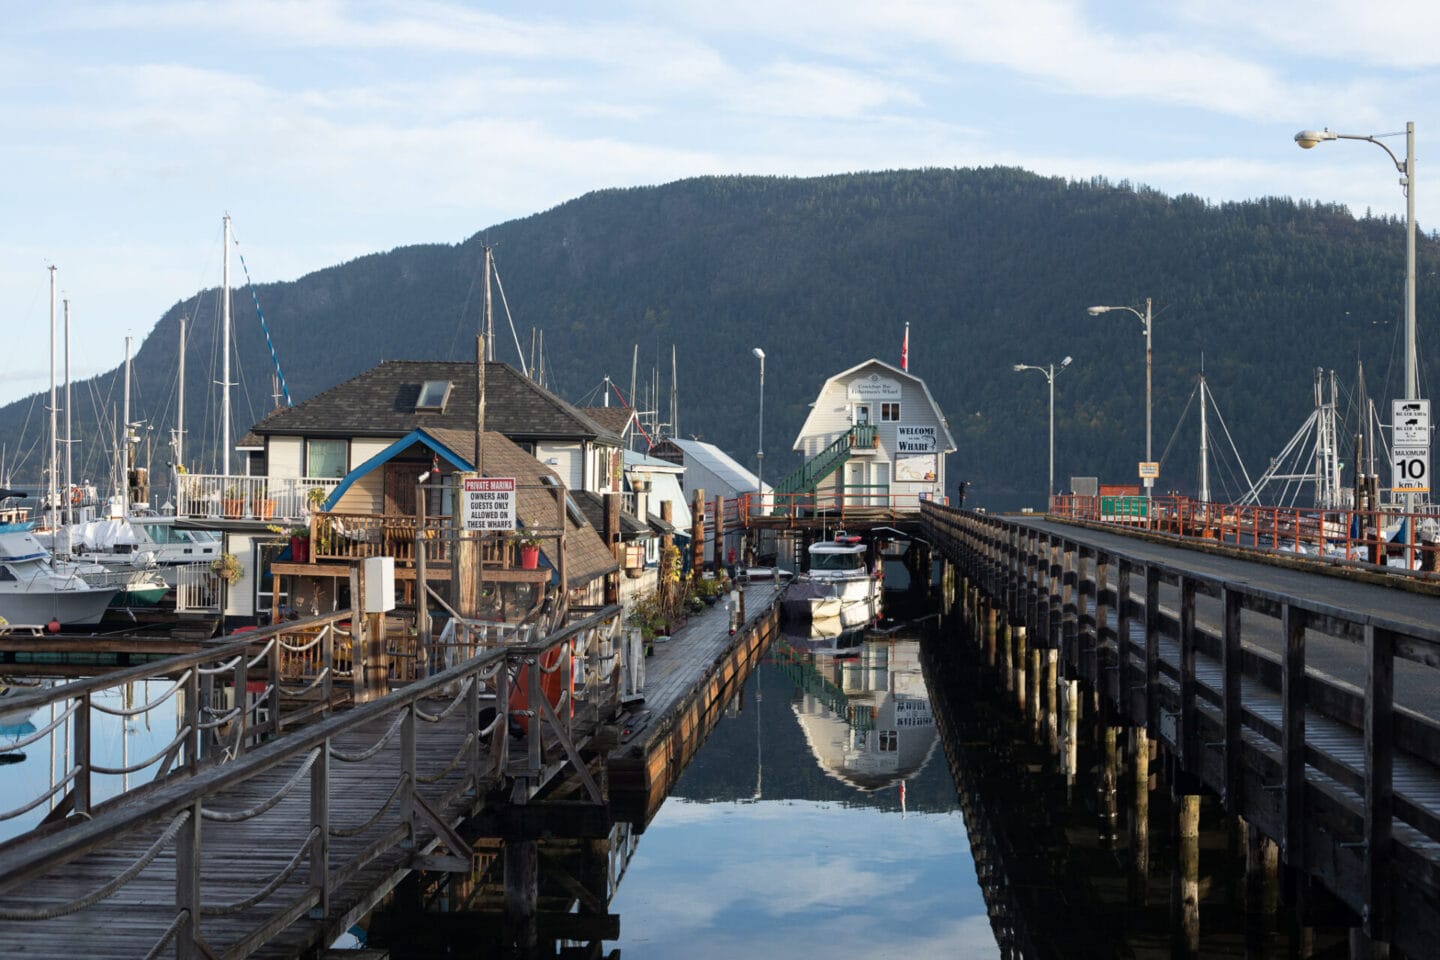 Day trips from Victoria - Cowichan Bay